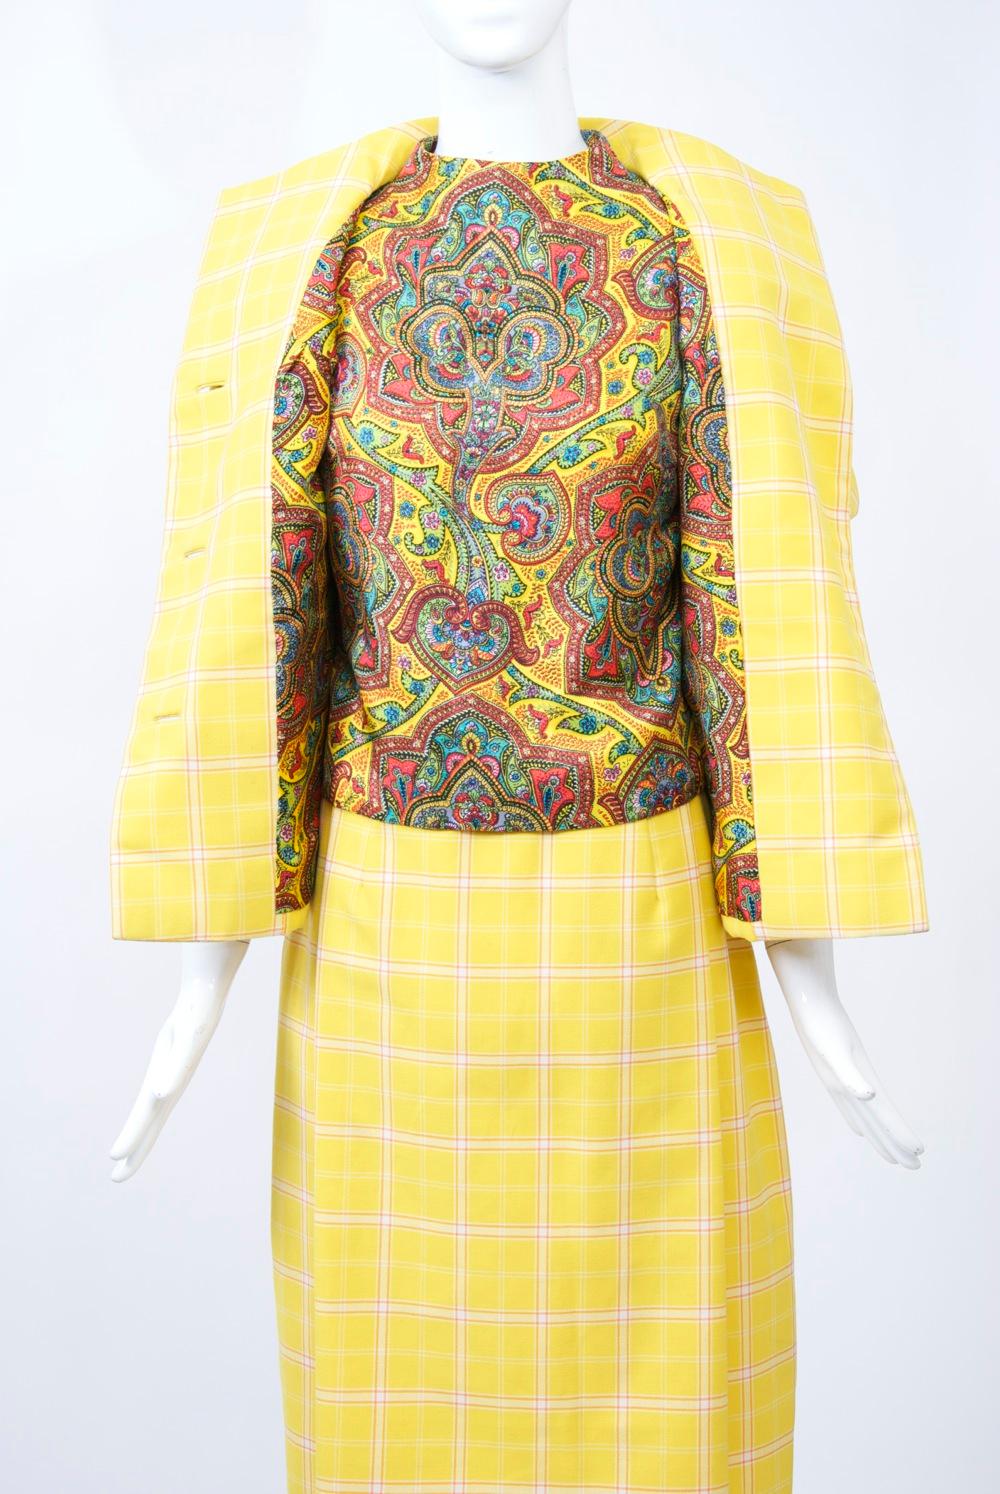 Early Bill Blass spring suit in yellow windowpane plaid worsted wool, the jacket lining and sleeveless shell in complementary silk paisley. The short-sleeve jacket features a funnel neckline, diagonal seaming from underneath the raglan sleeves to